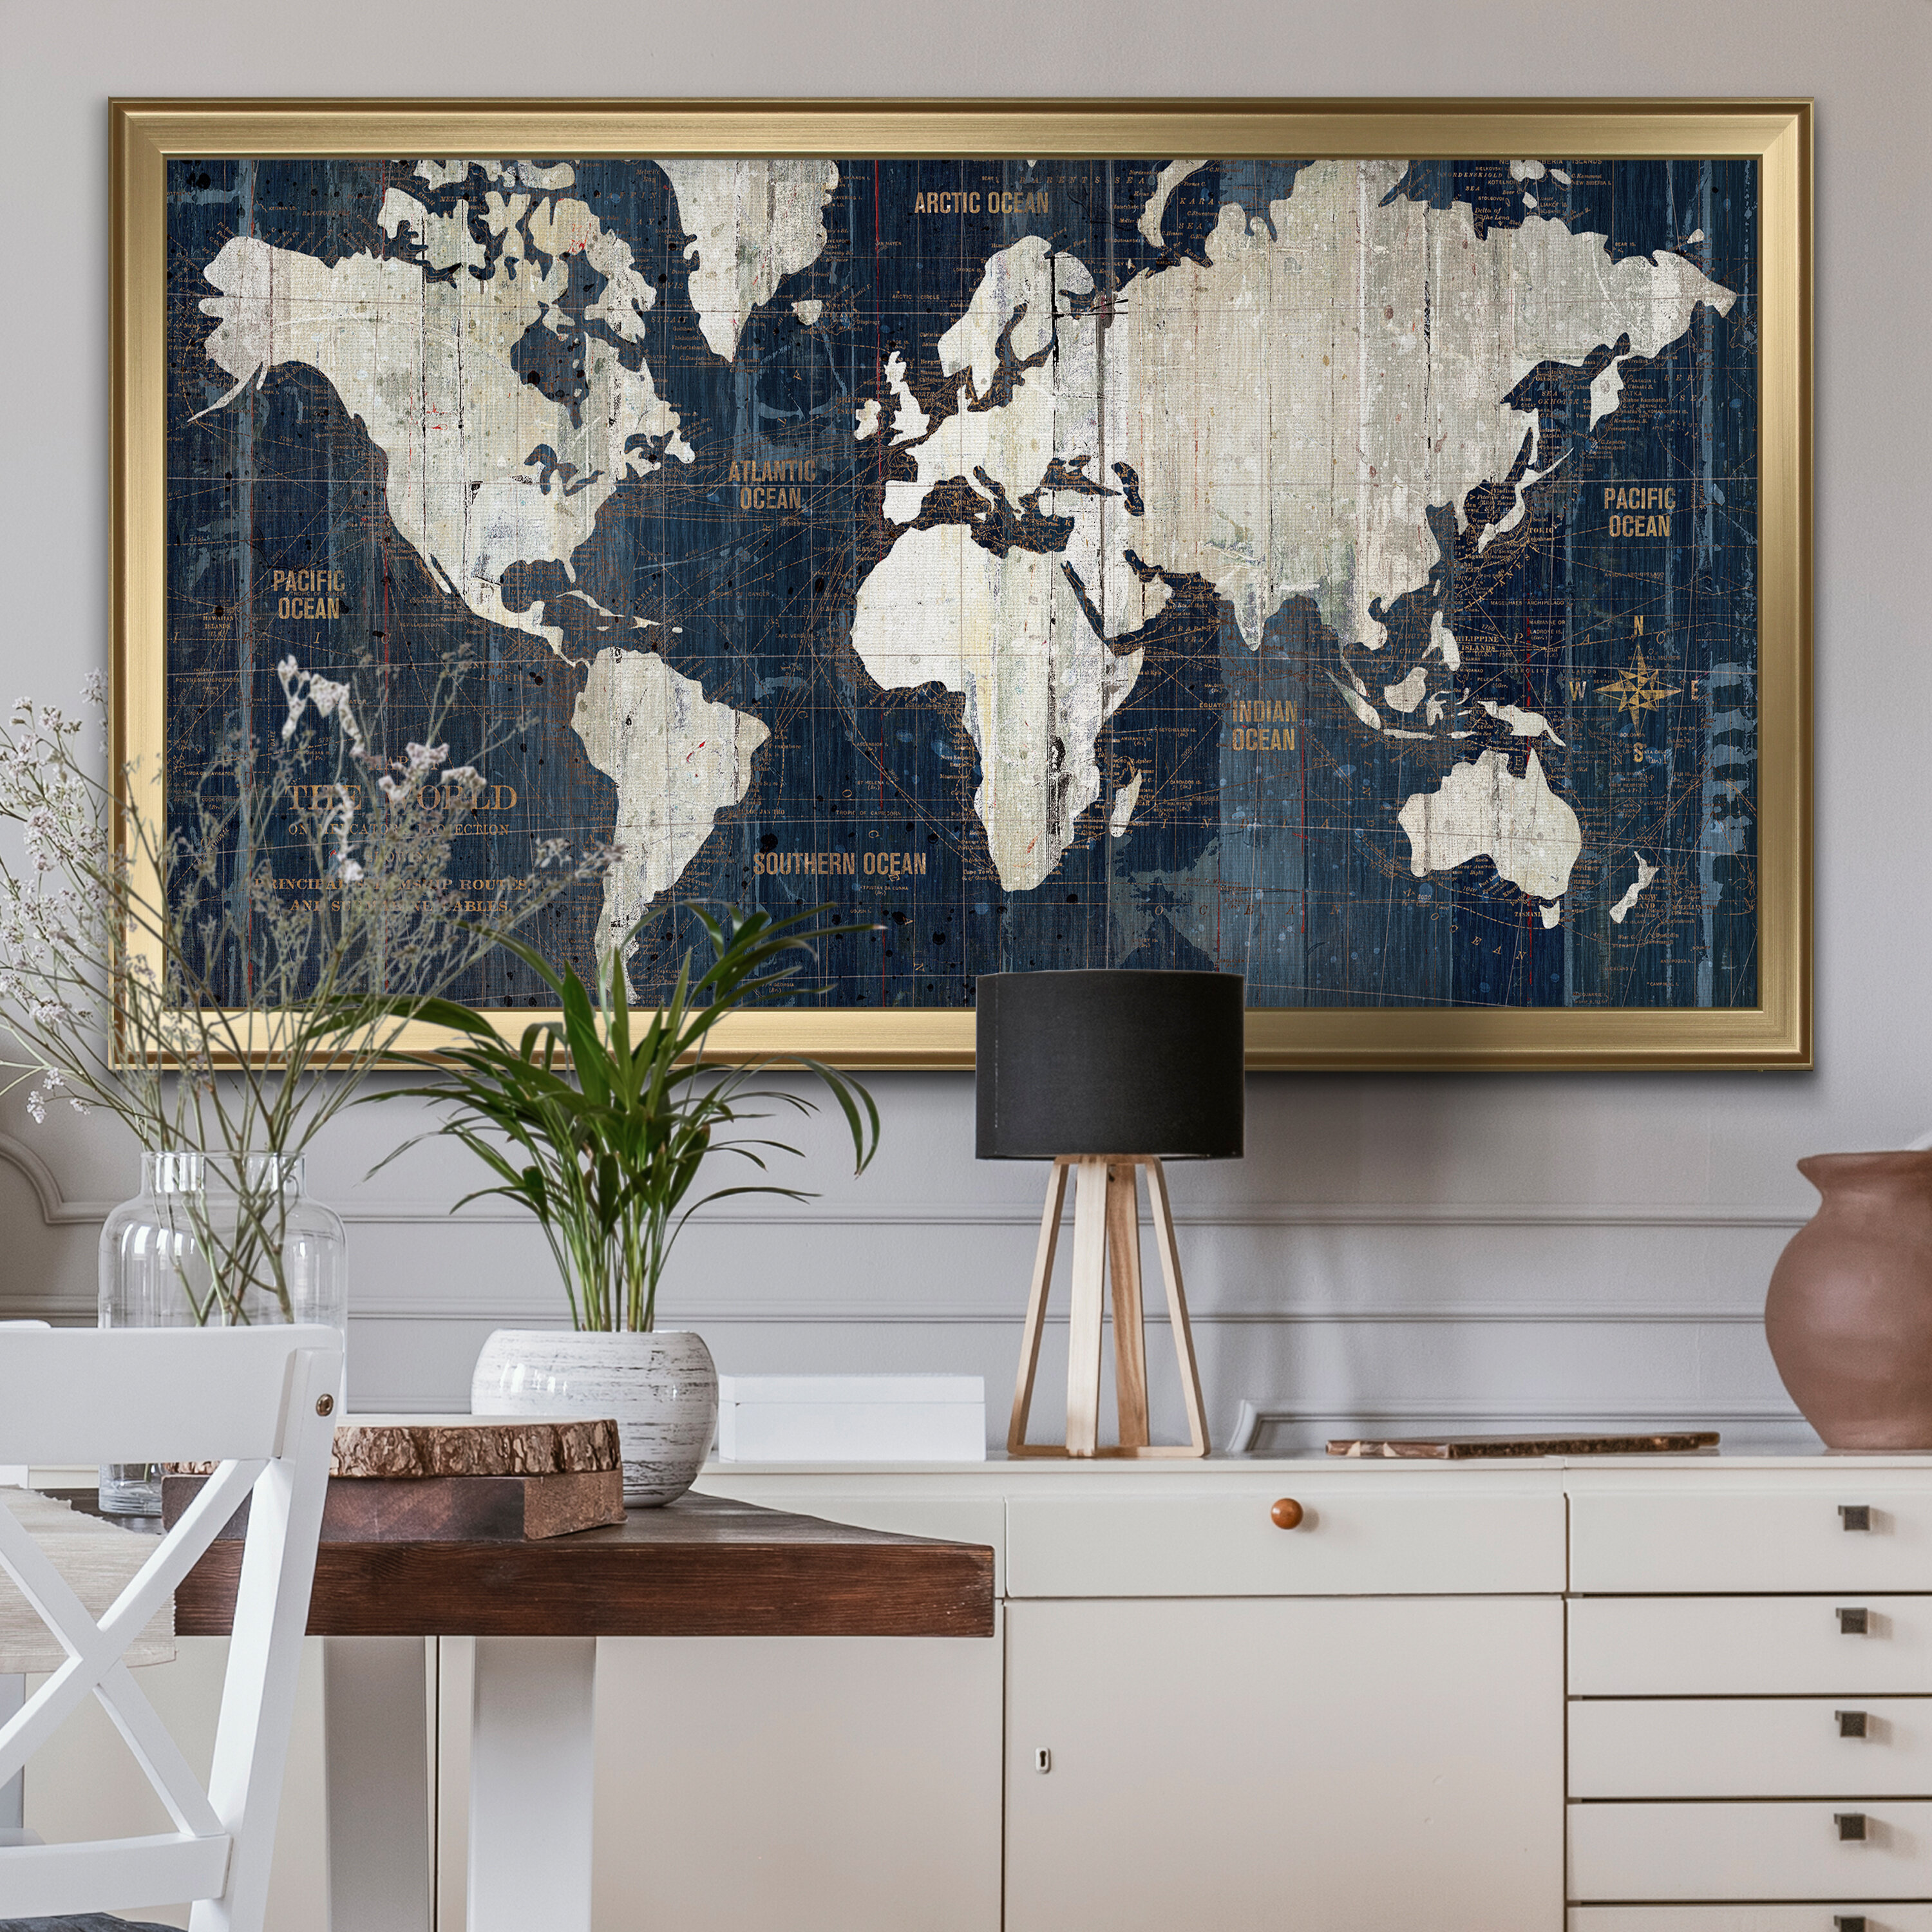 Amazon.com: Murwall Map Wallpaper Monochrome World Map Wall Mural Retro  Home Decor Vintage Cafe Design Young Room Architectural Office Decor :  Handmade Products